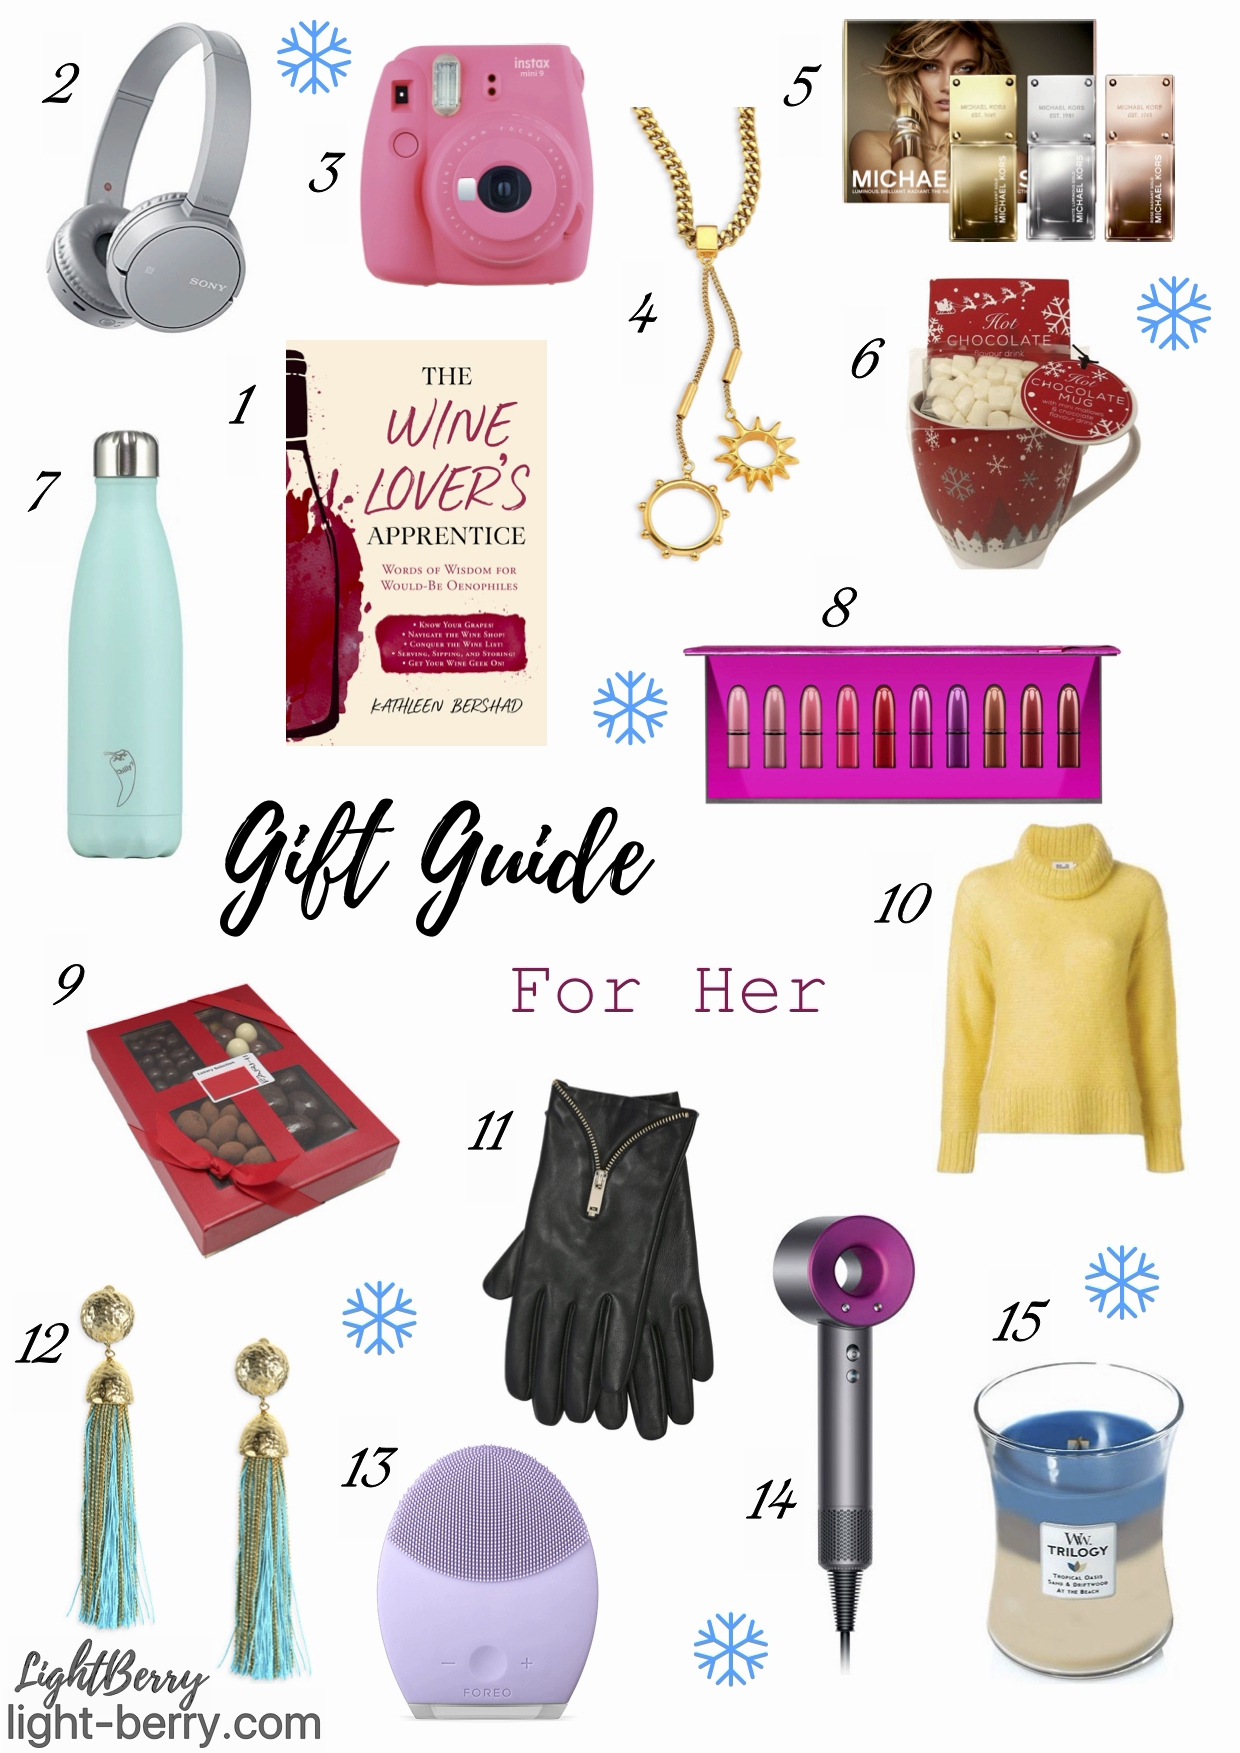 gift ideas for her